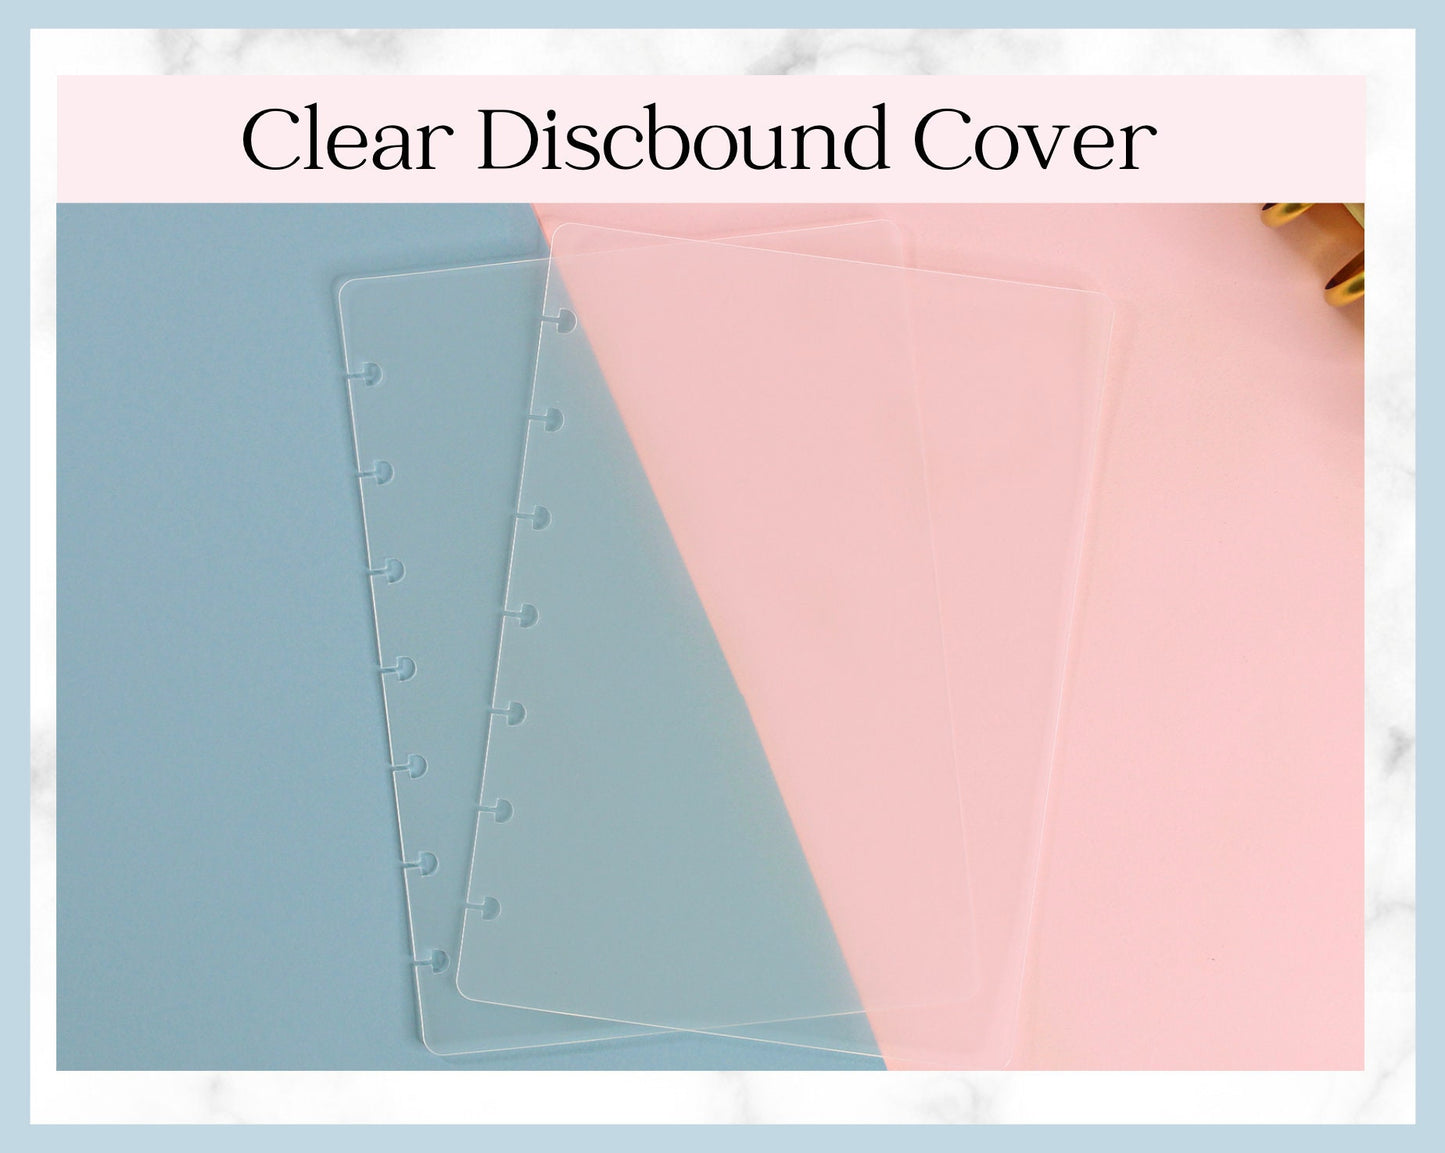 DISCBOUND COVERS Frosted Clear | 7 Hole Punch, Plastic, Sticker Album, Planner, B6 Size